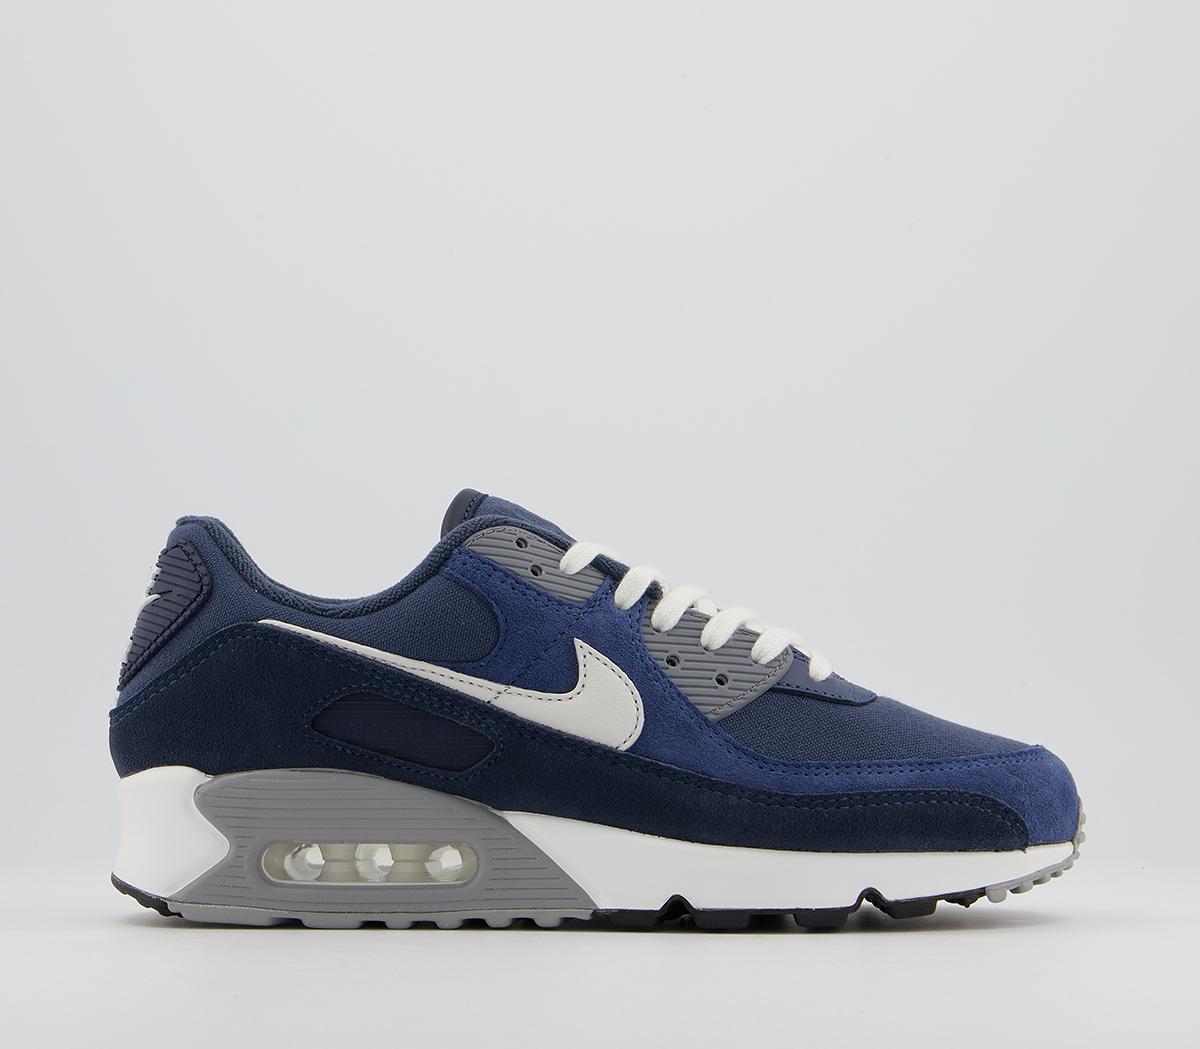 Nike Air Max Trainers Obsidian Wolf Grey Midnight Navy Thunder Blue - Women's Classic Trainers